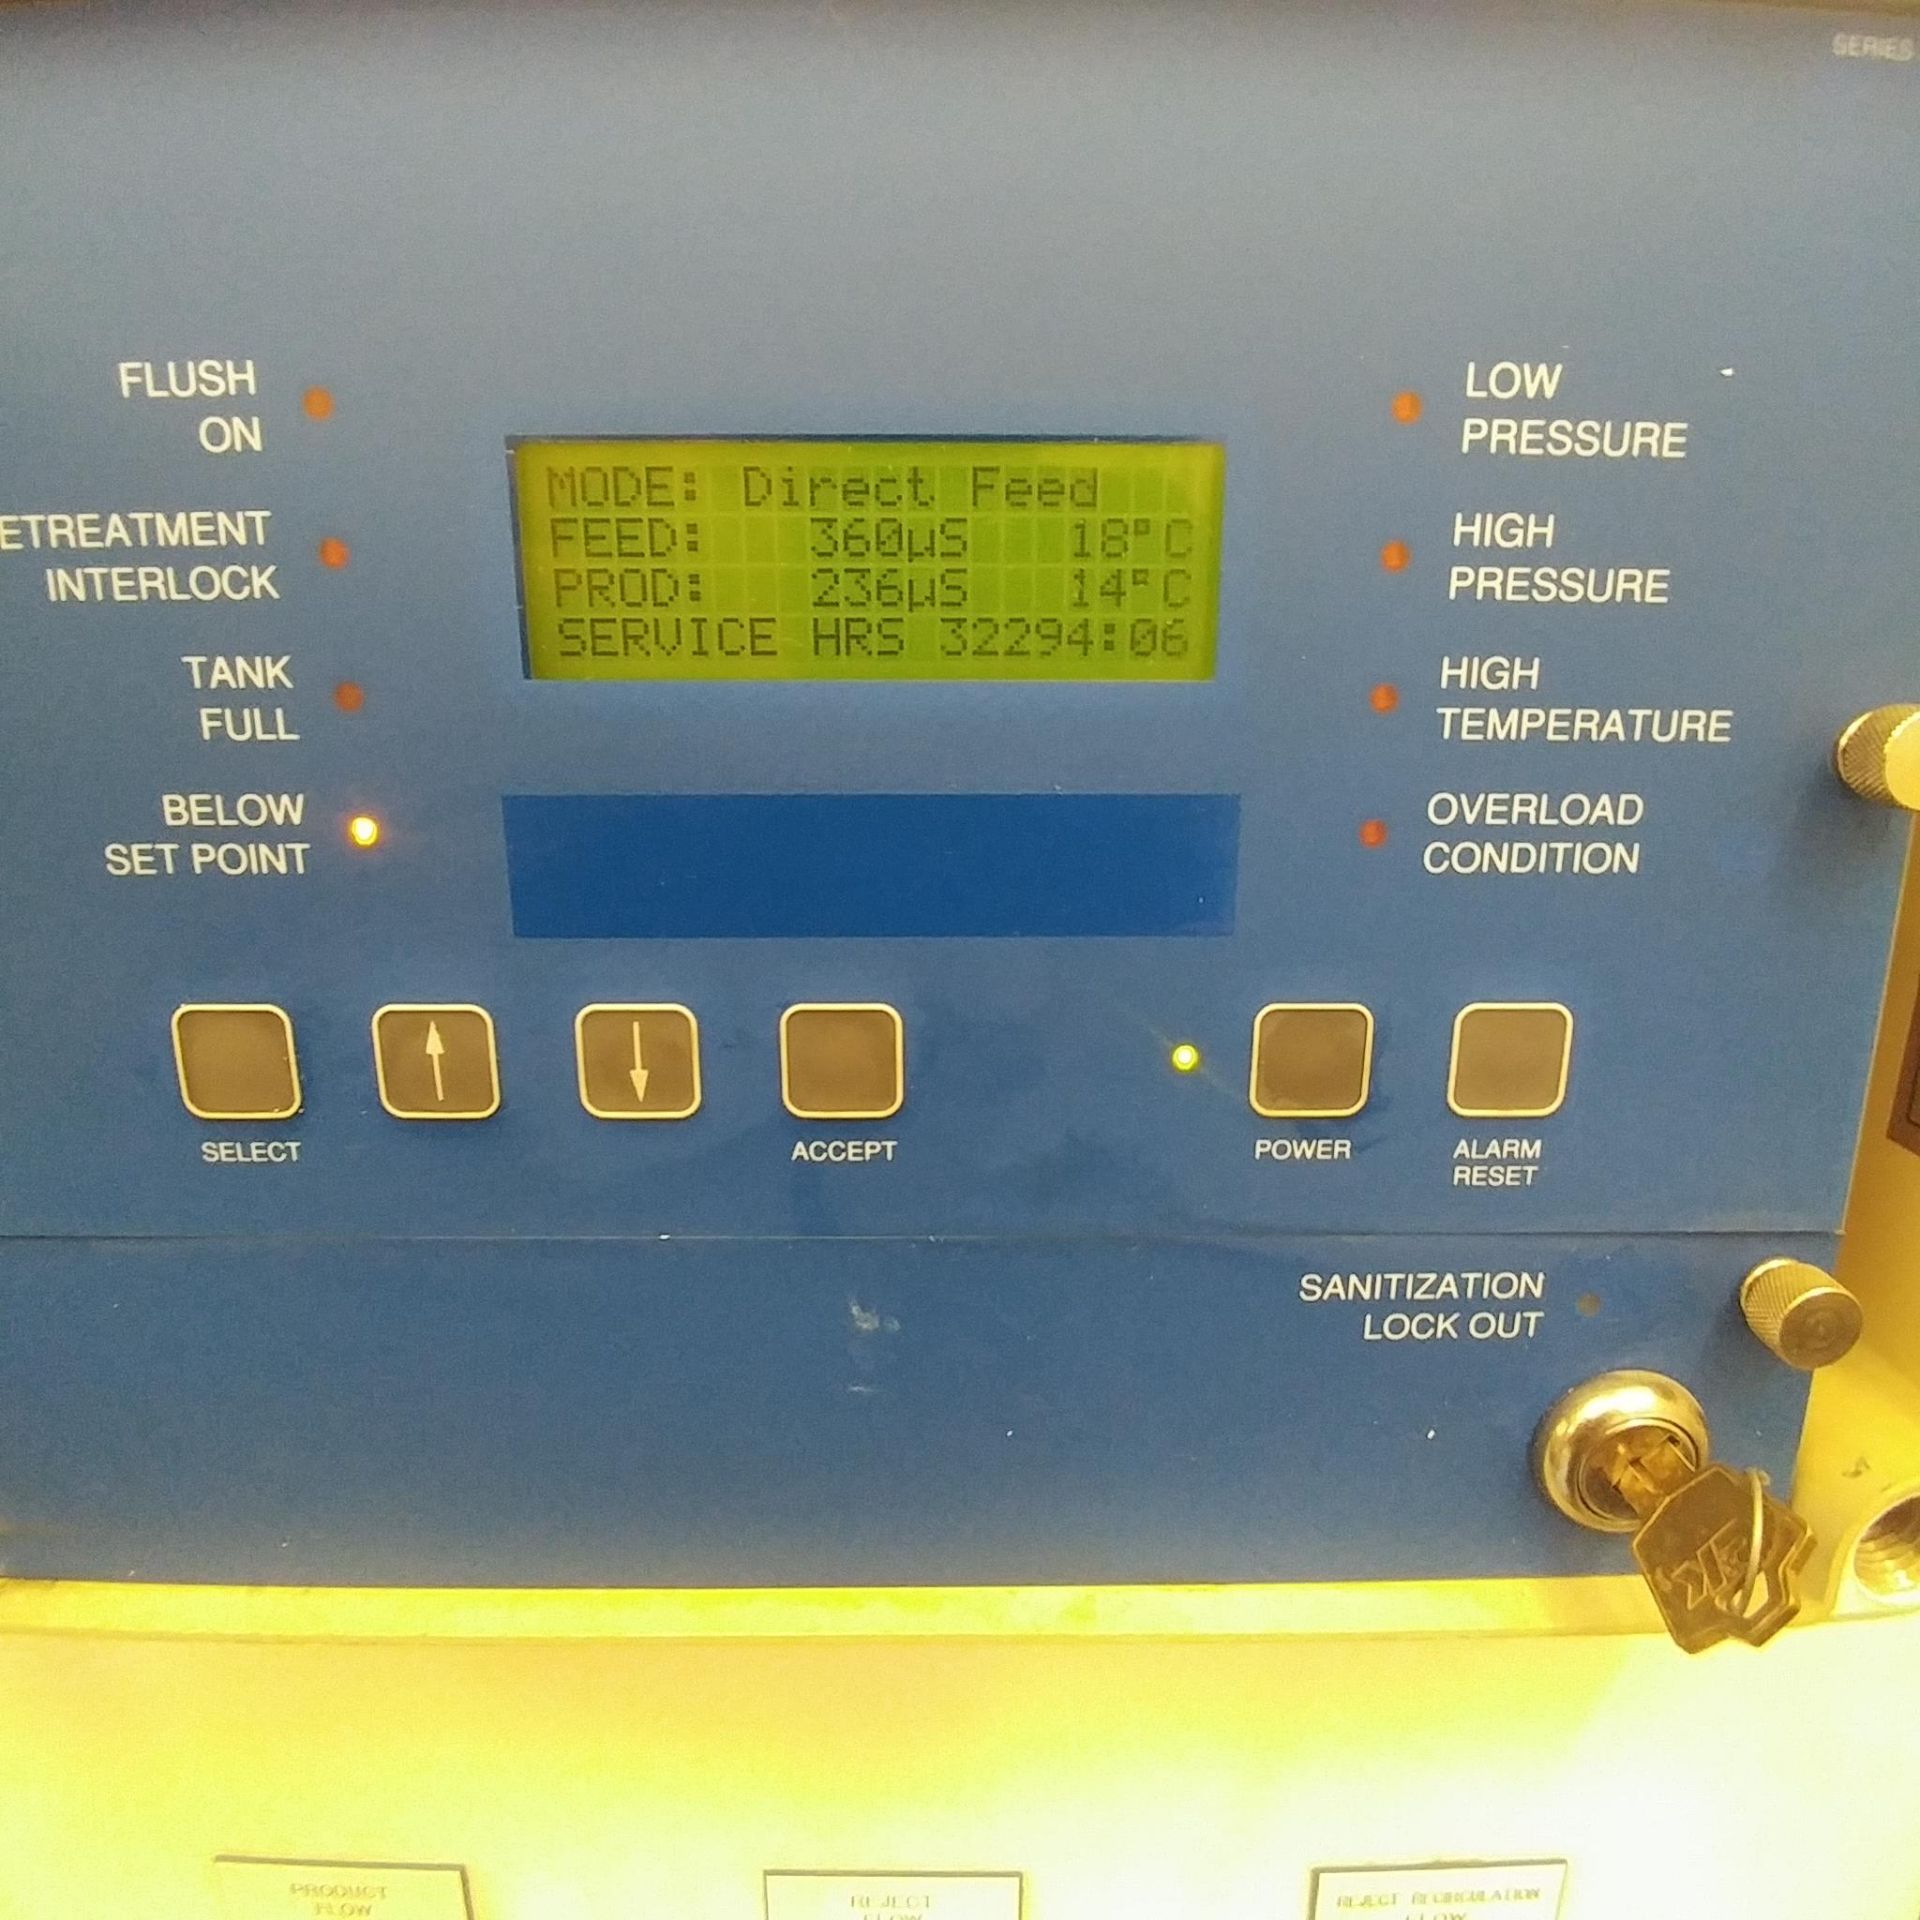 US Filter Reverse Osmosis water system with control panel 115V **See Auctioneers Note** - Image 6 of 12